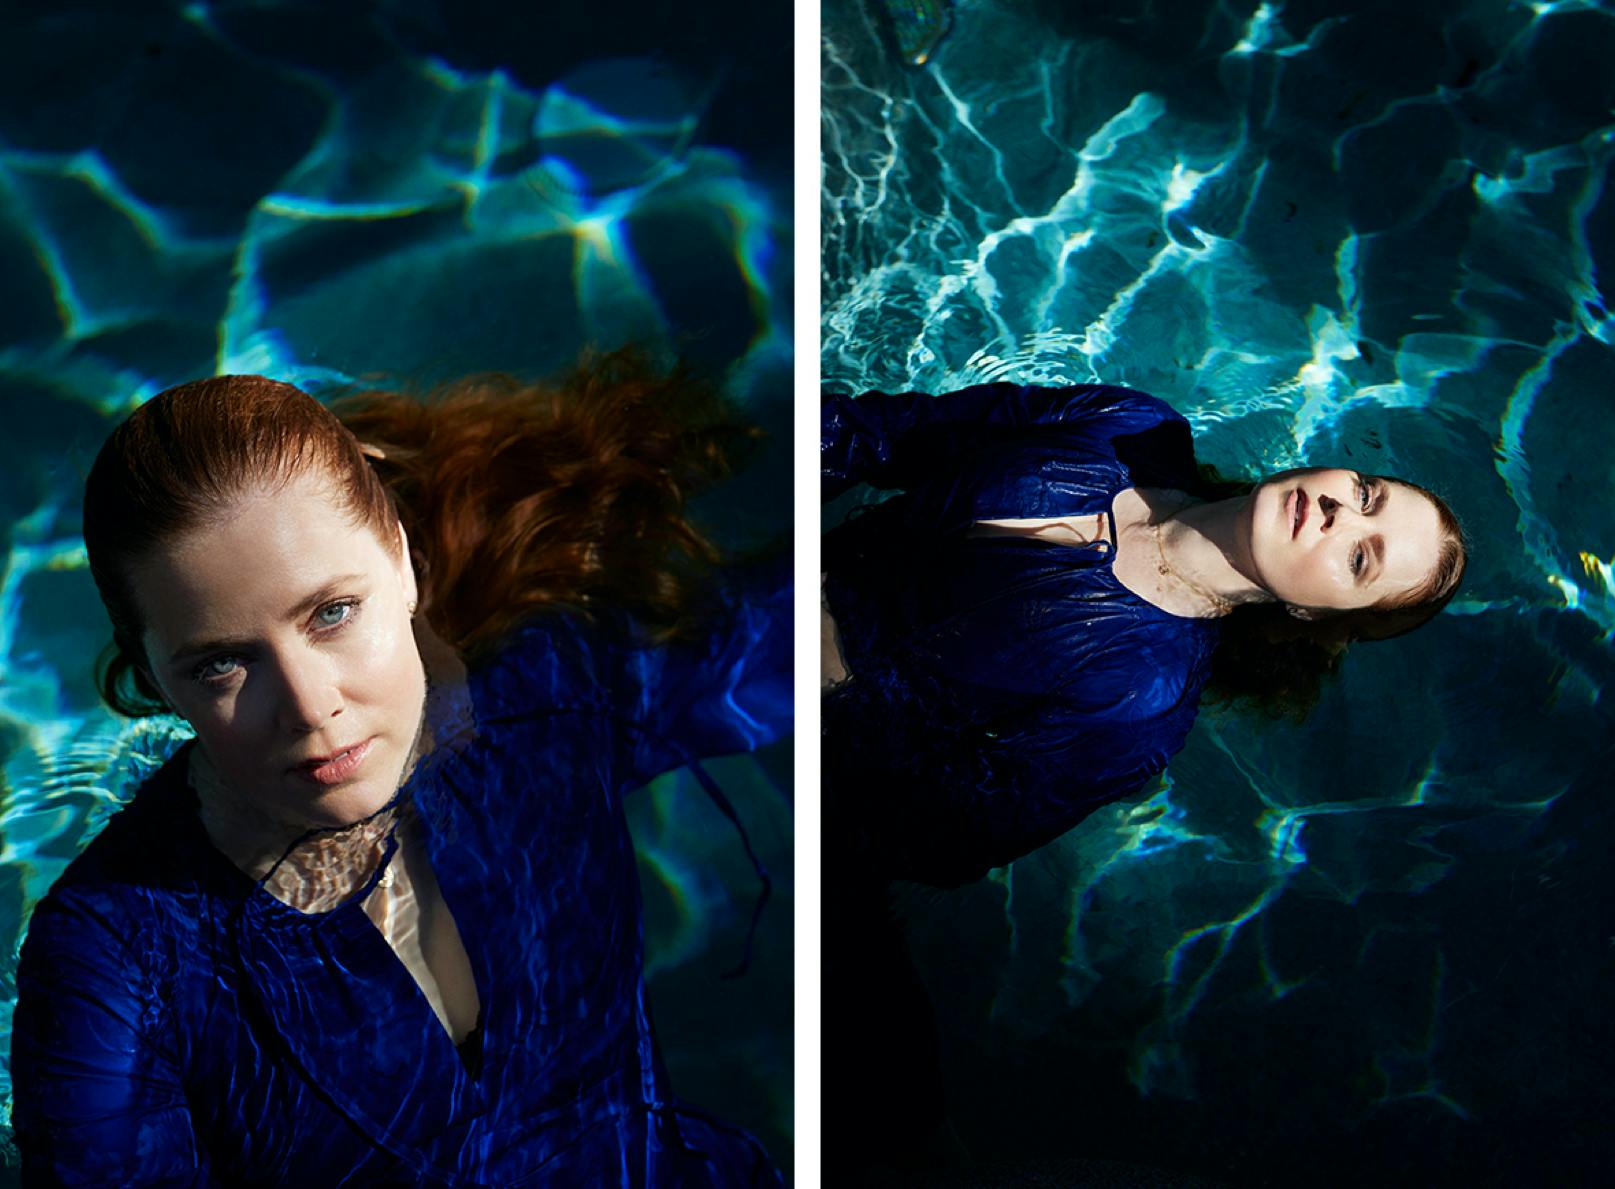 Amy Adams wears a dark blue dress and floats in her pool.